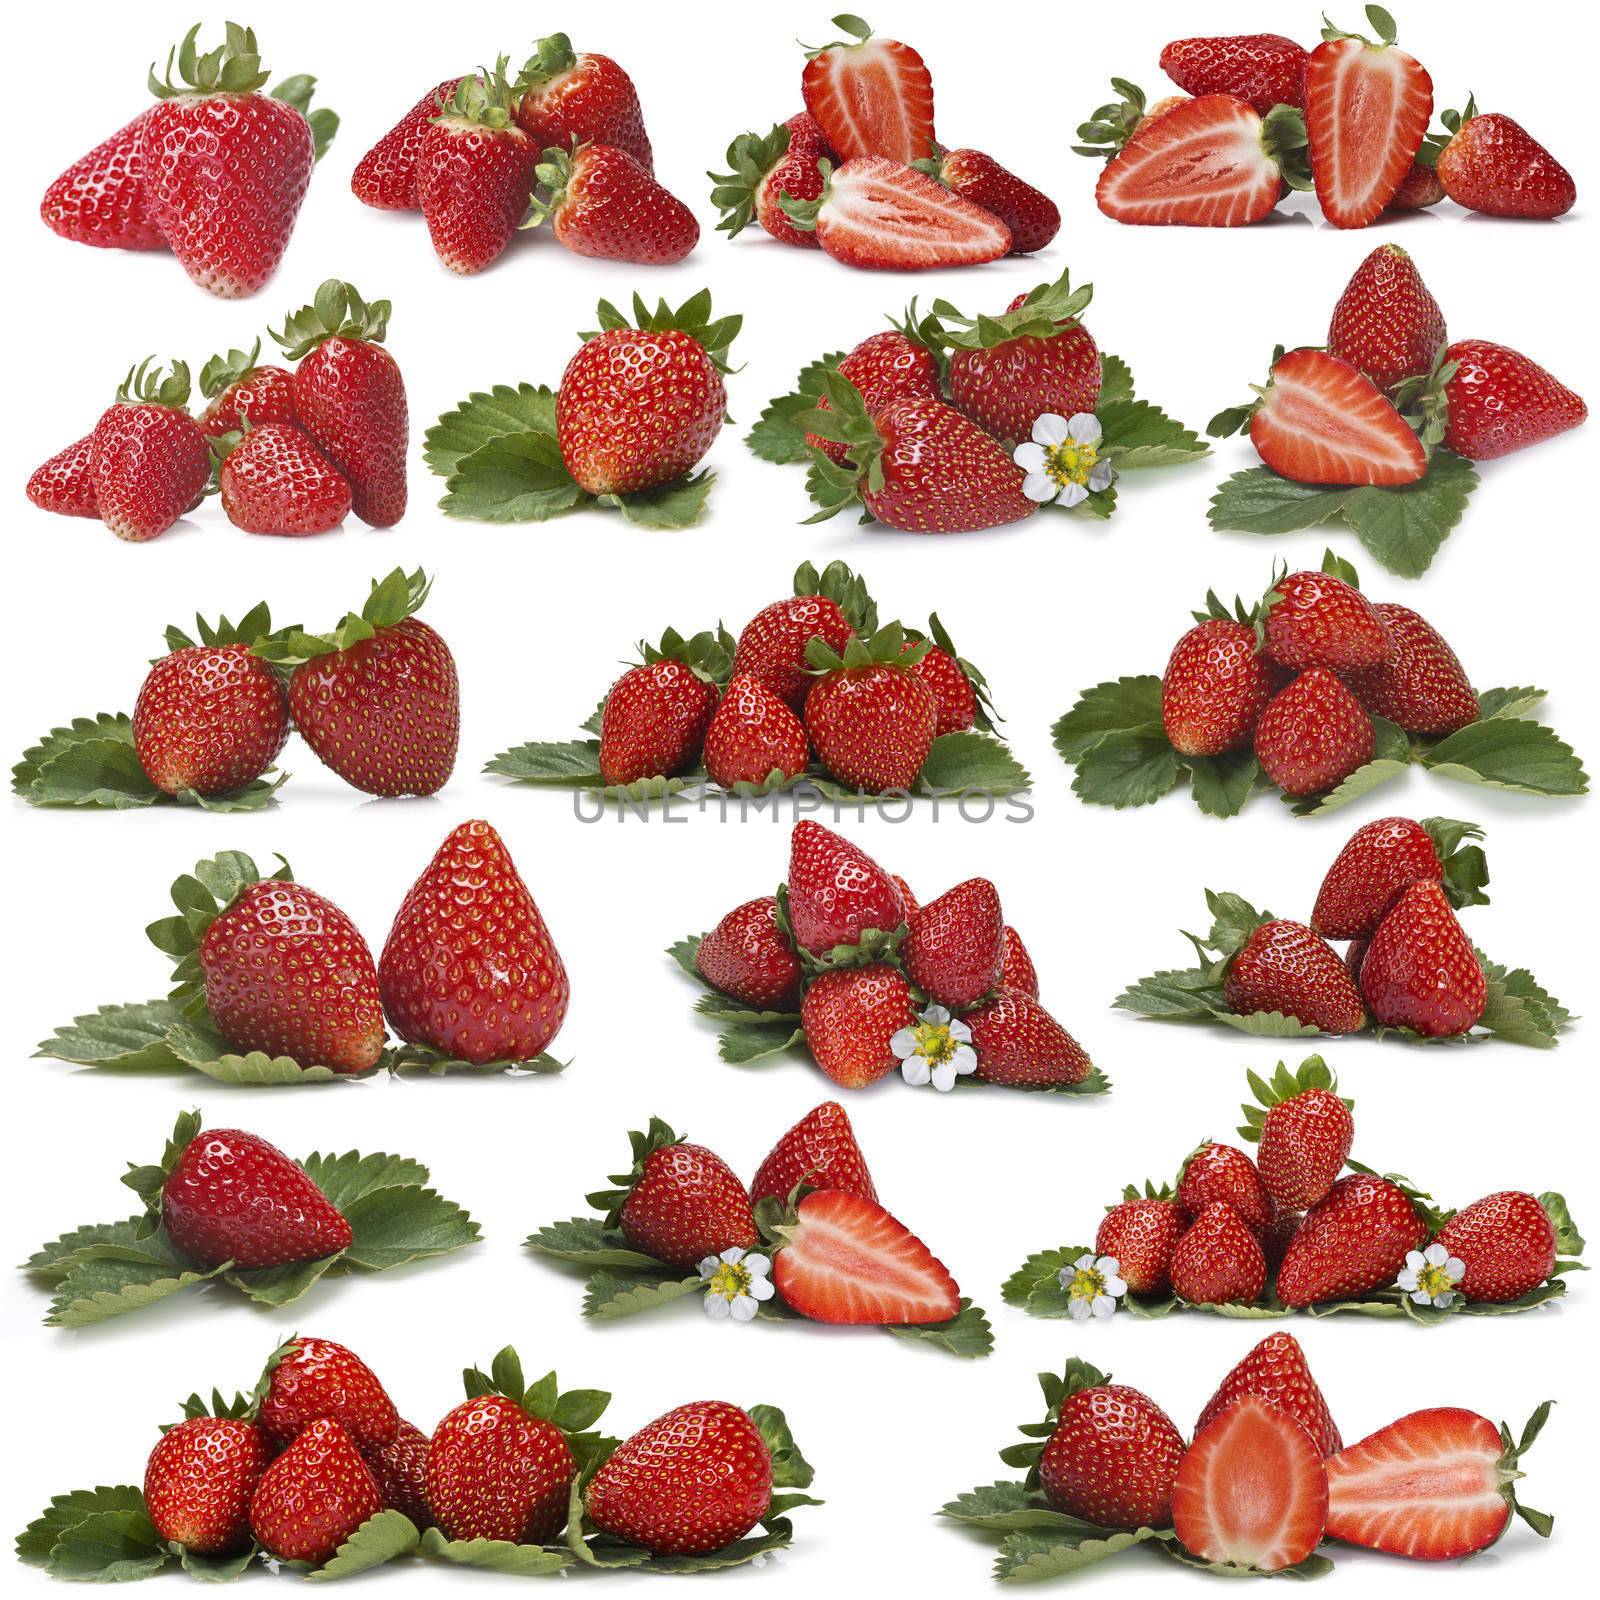 Great set of photographs of strawberries with leaves and flowers isolated over a white background.